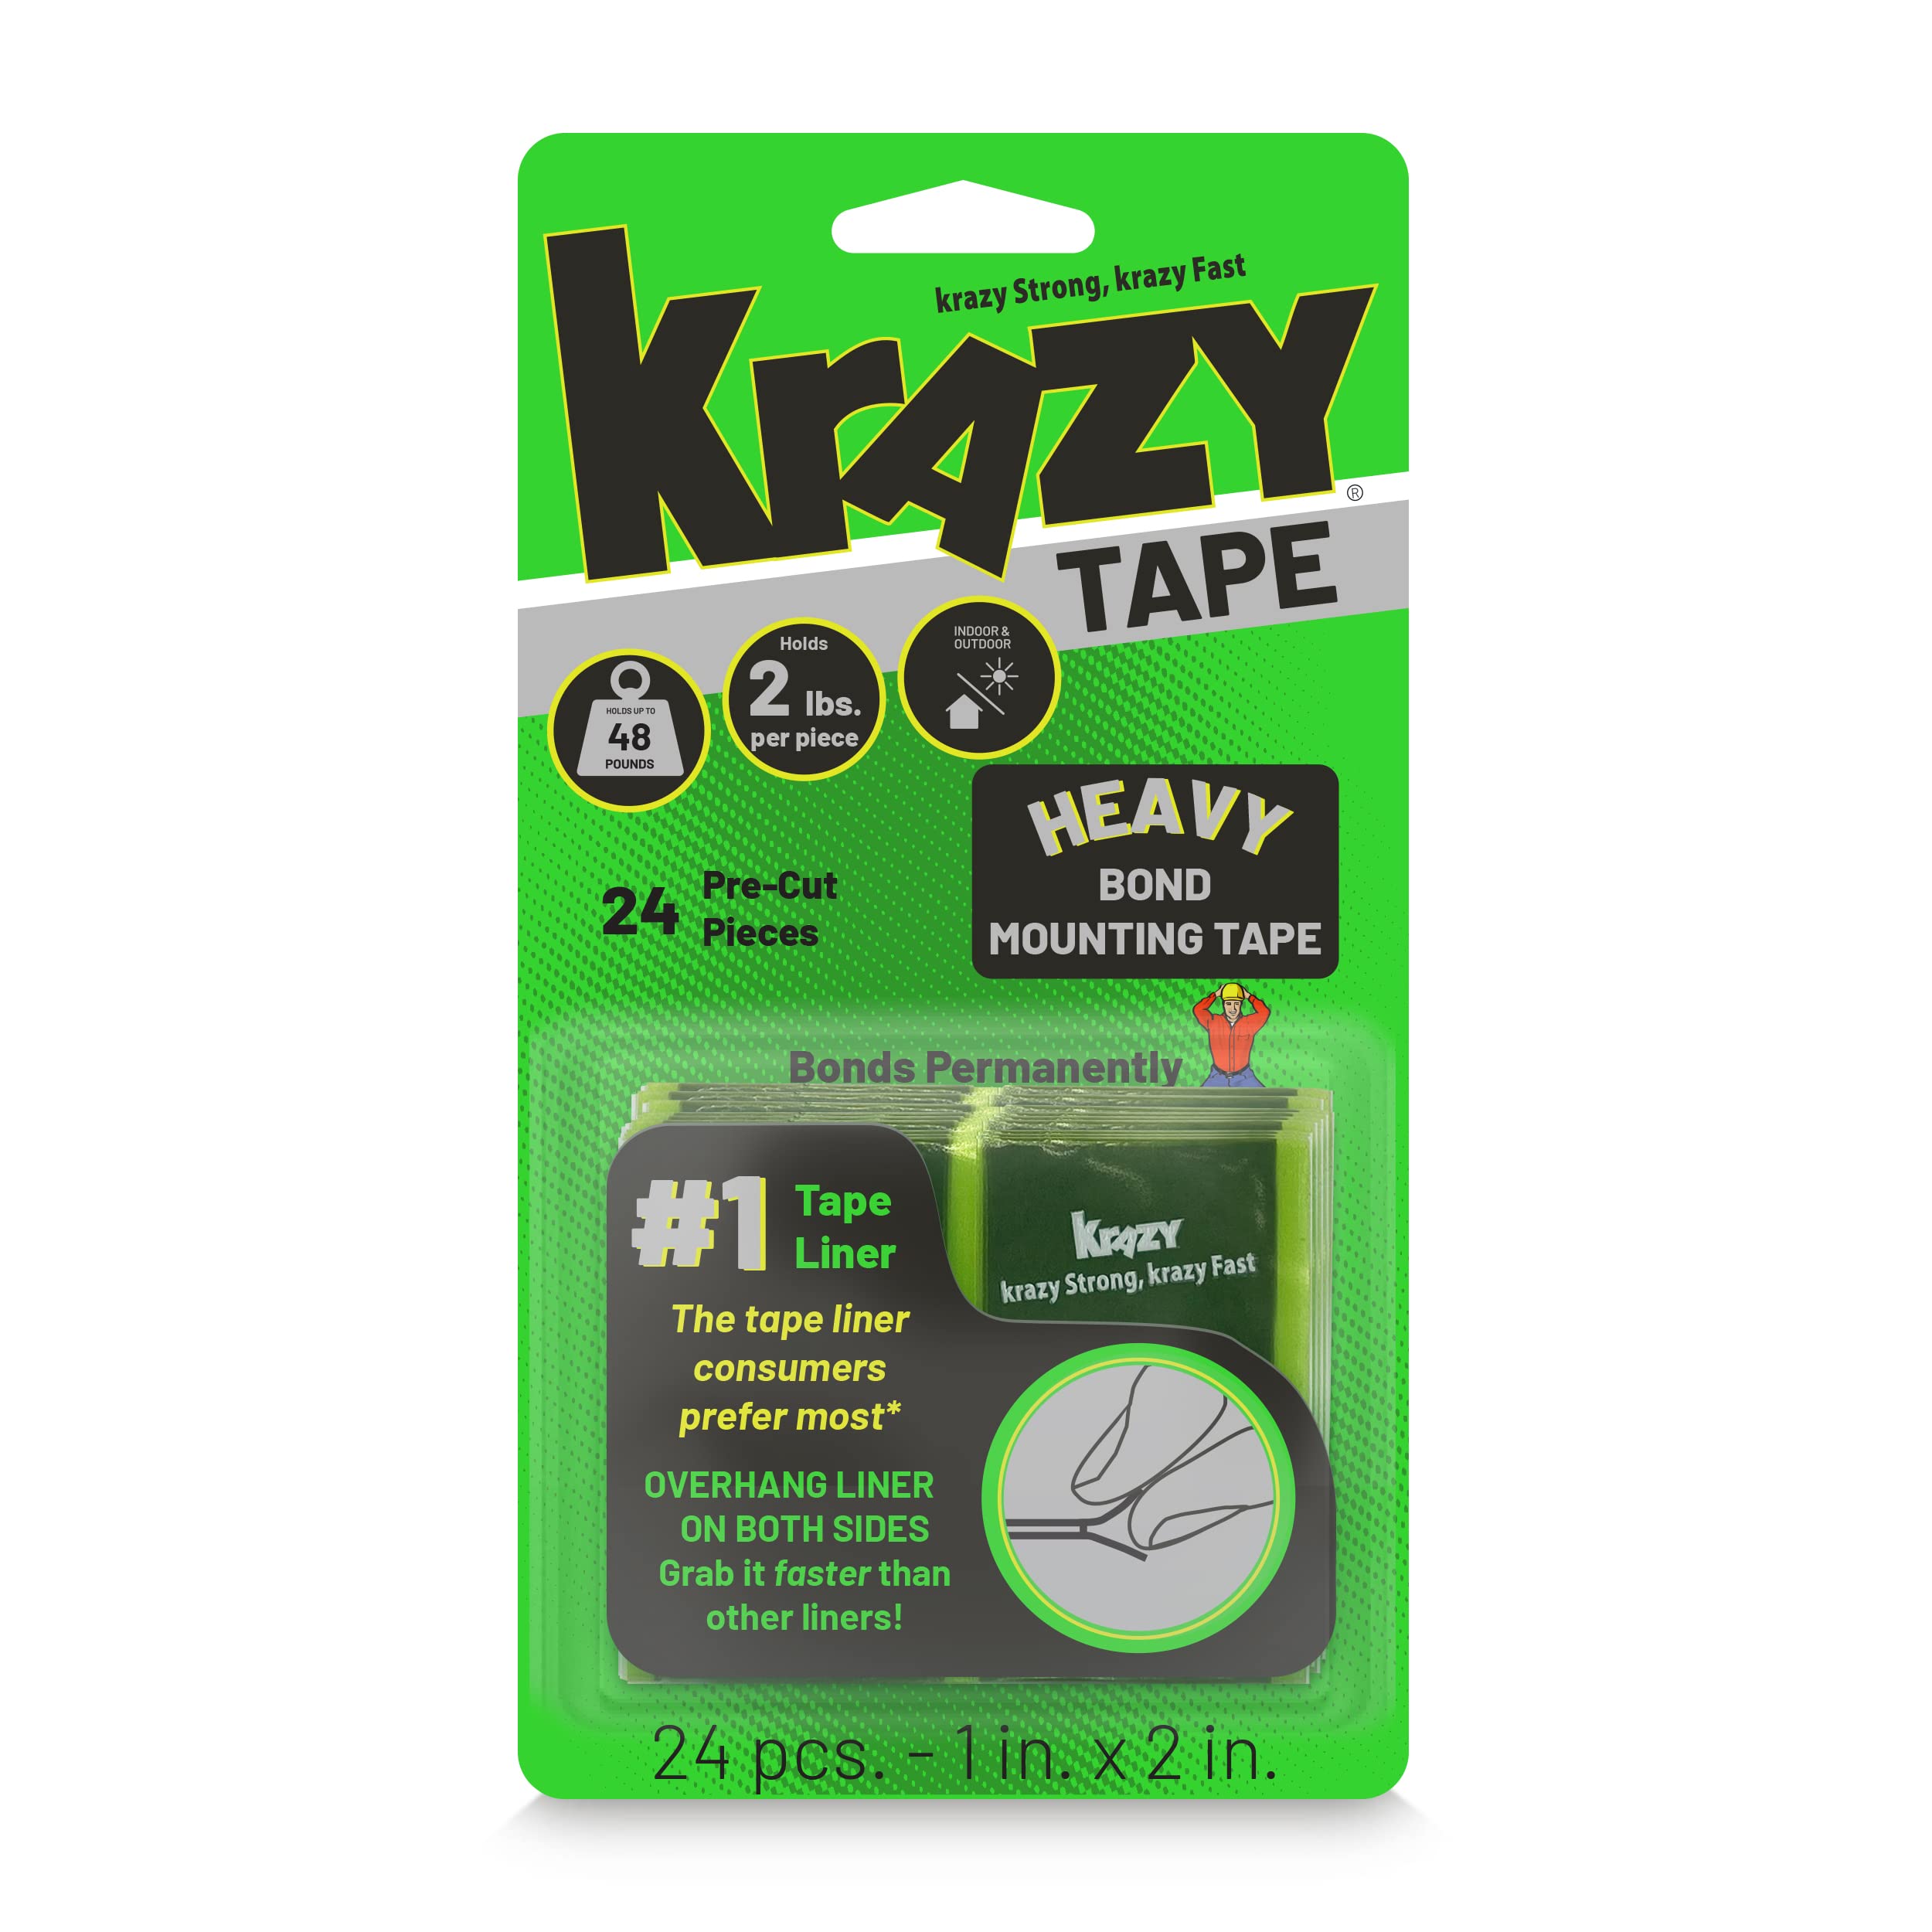 Krazy Tape Strong Bond Mounting Tape Heavy Duty Double Sided Tape 1 x 2  Grey Adhesive Strips (Pack of 24 Pre-Cut Pieces) 24 Count